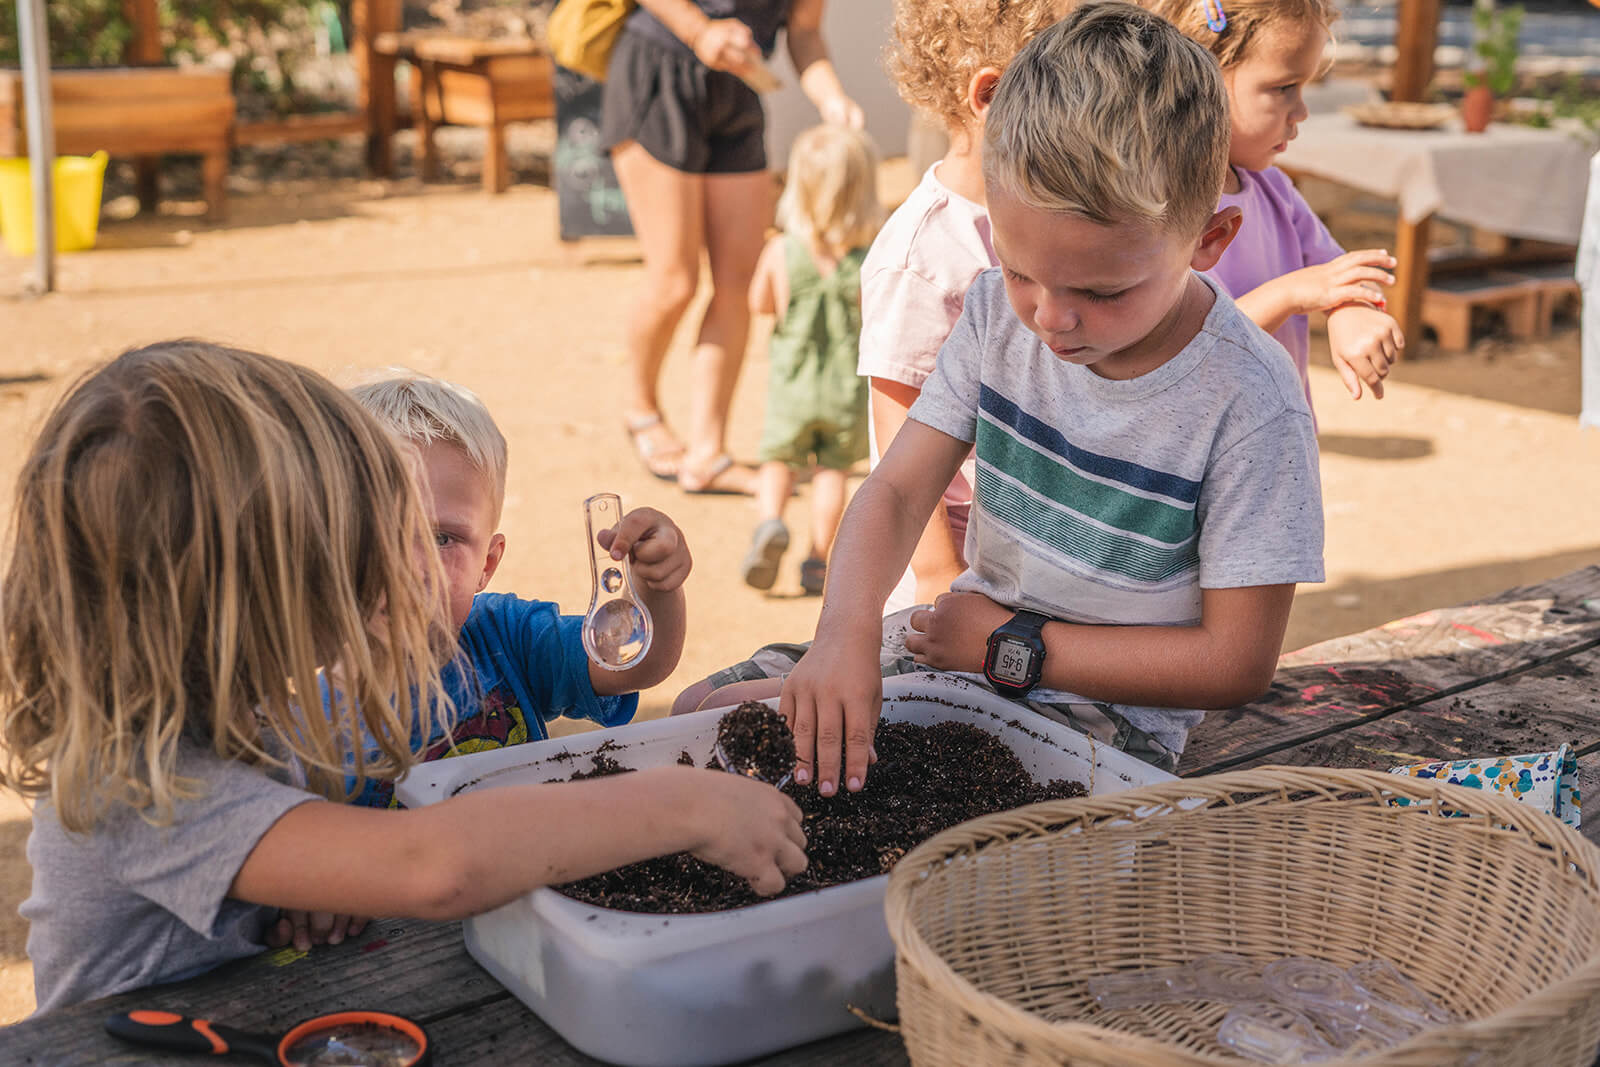 three kids gathered around a tub of dirt exploring what's inside